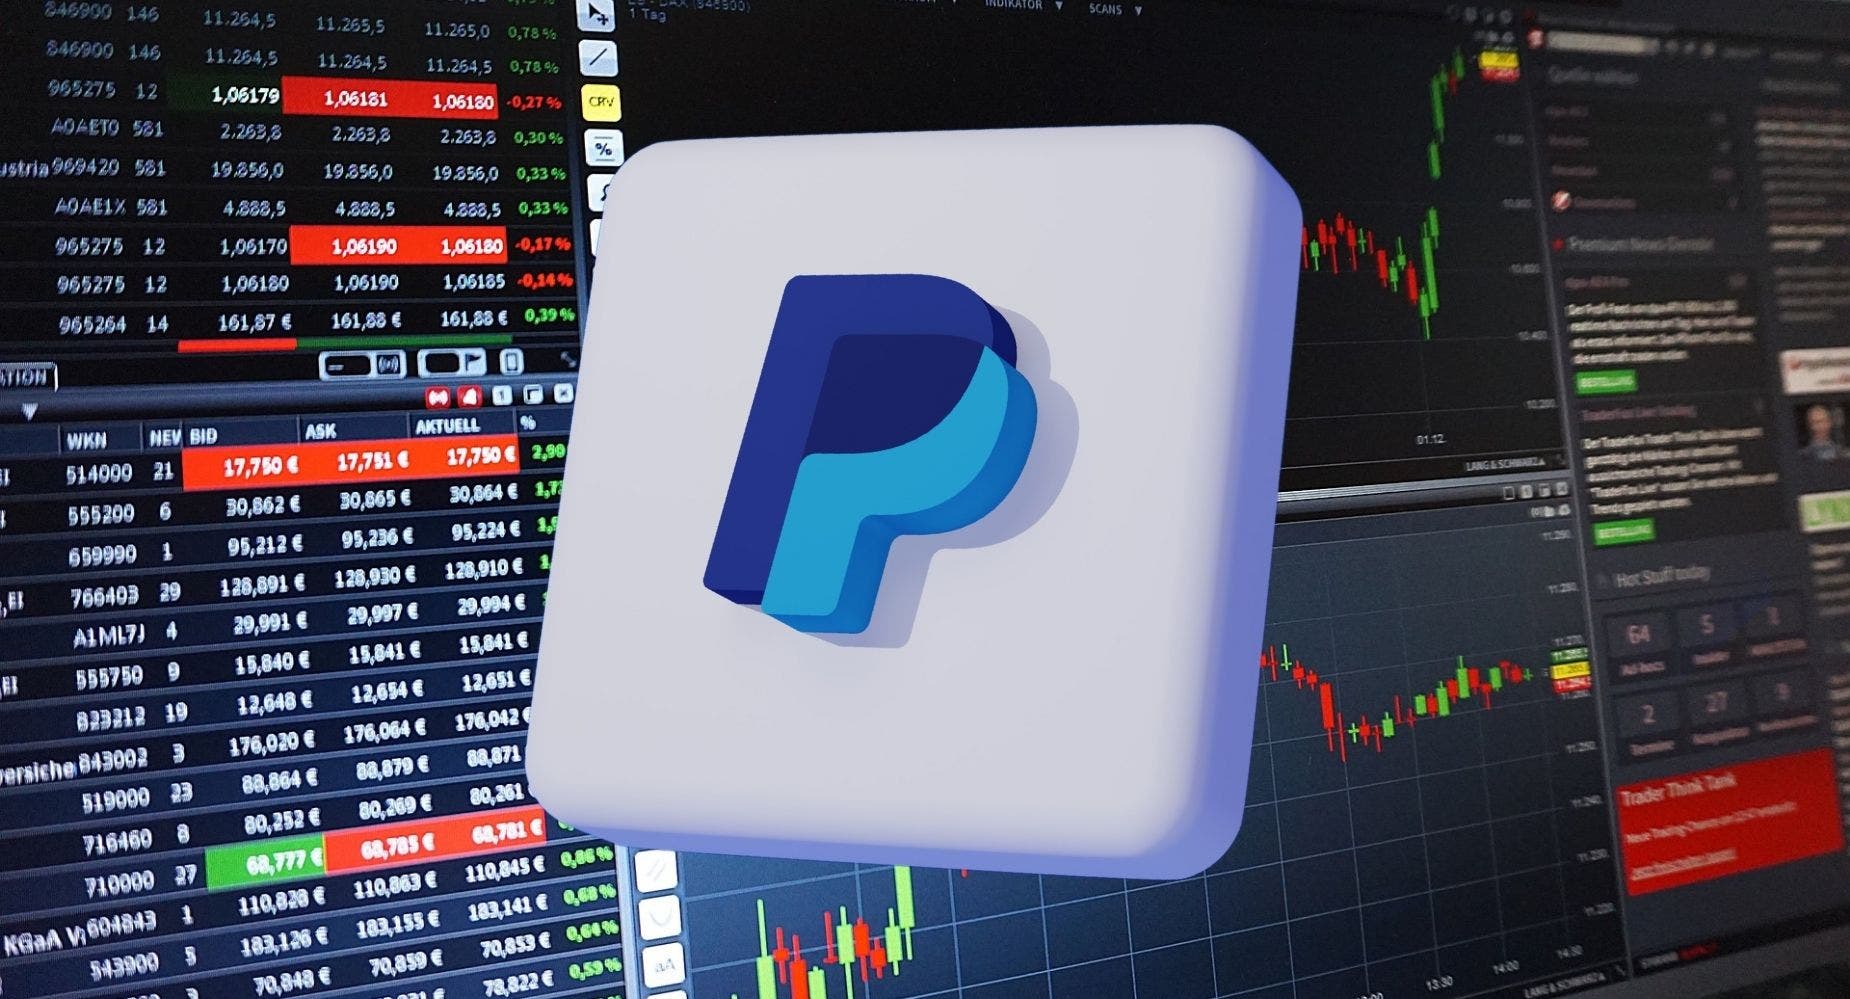 PayPal, SoFi Technologies And Some Other Big Stocks Moving Higher In Today's Pre-Market Session